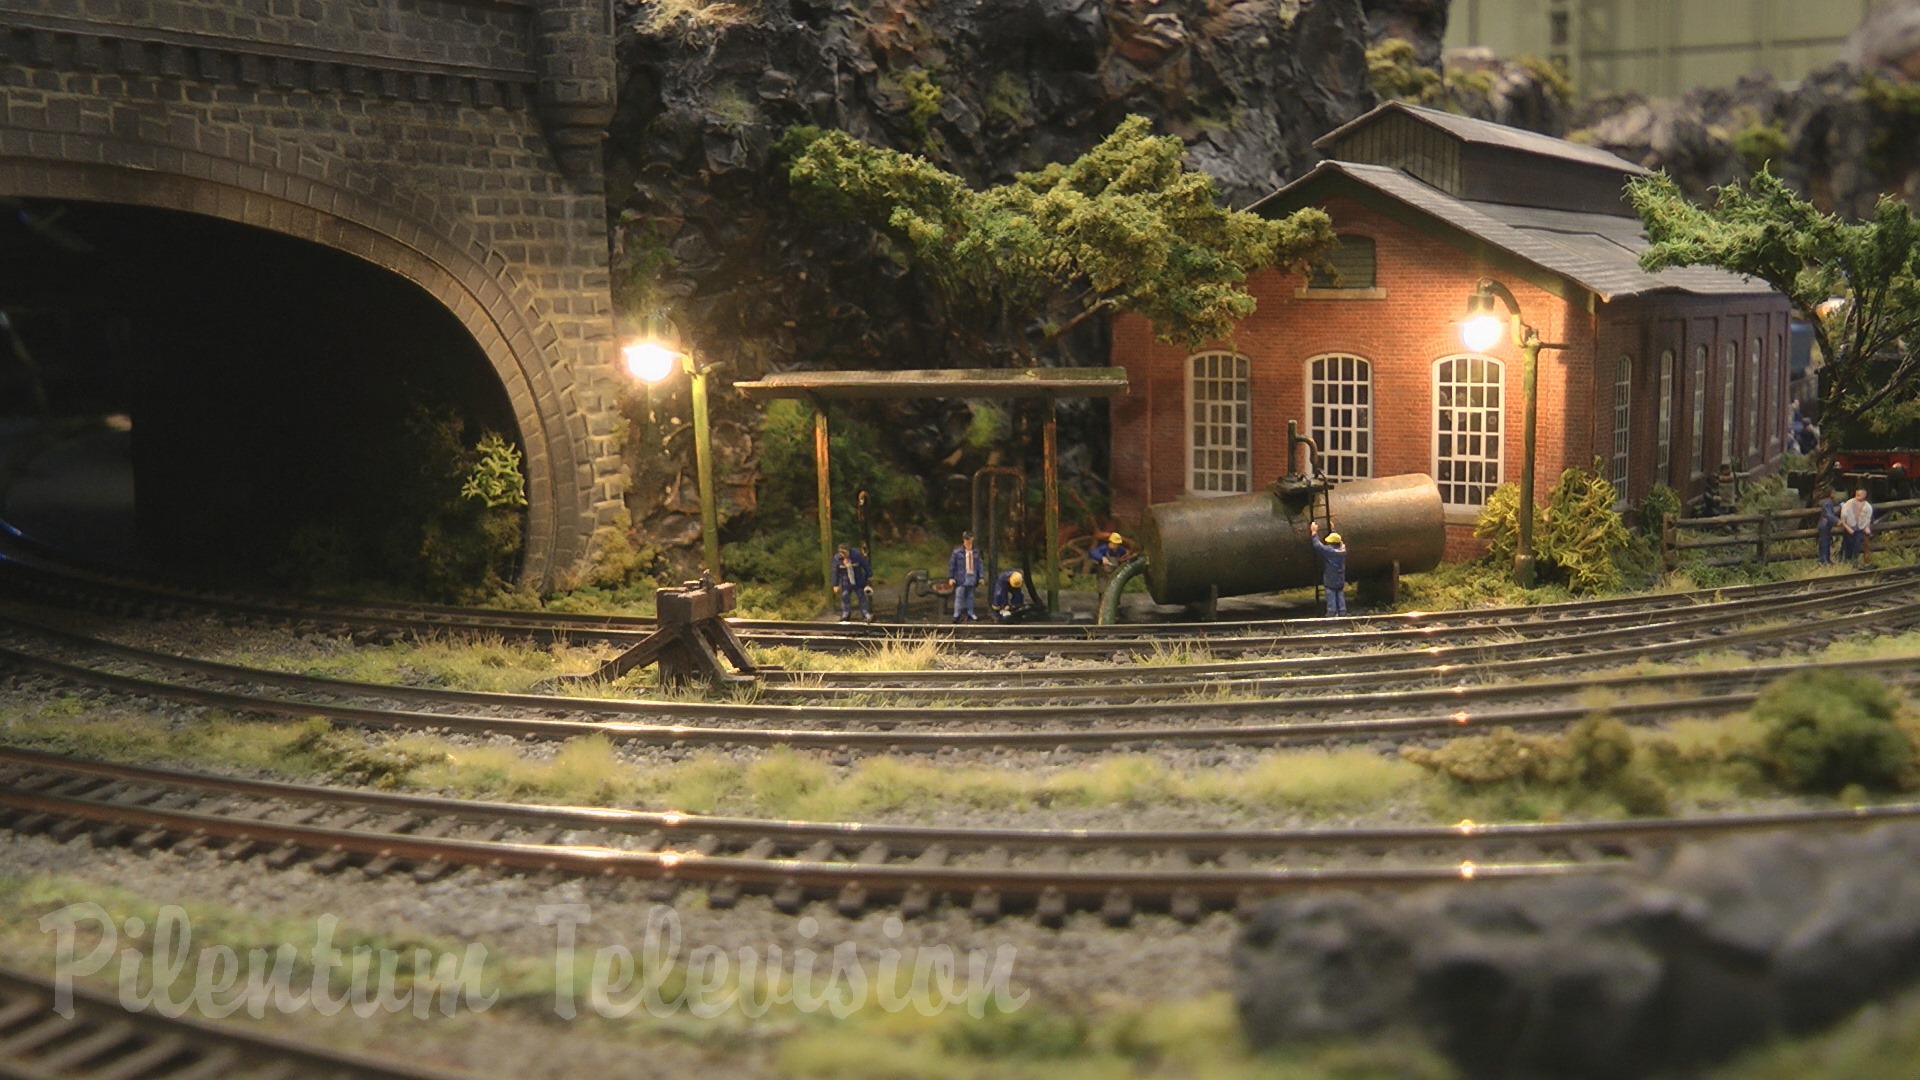 Model Railroading in N Scale: The Rockcliffe Layout by David and John Riddle